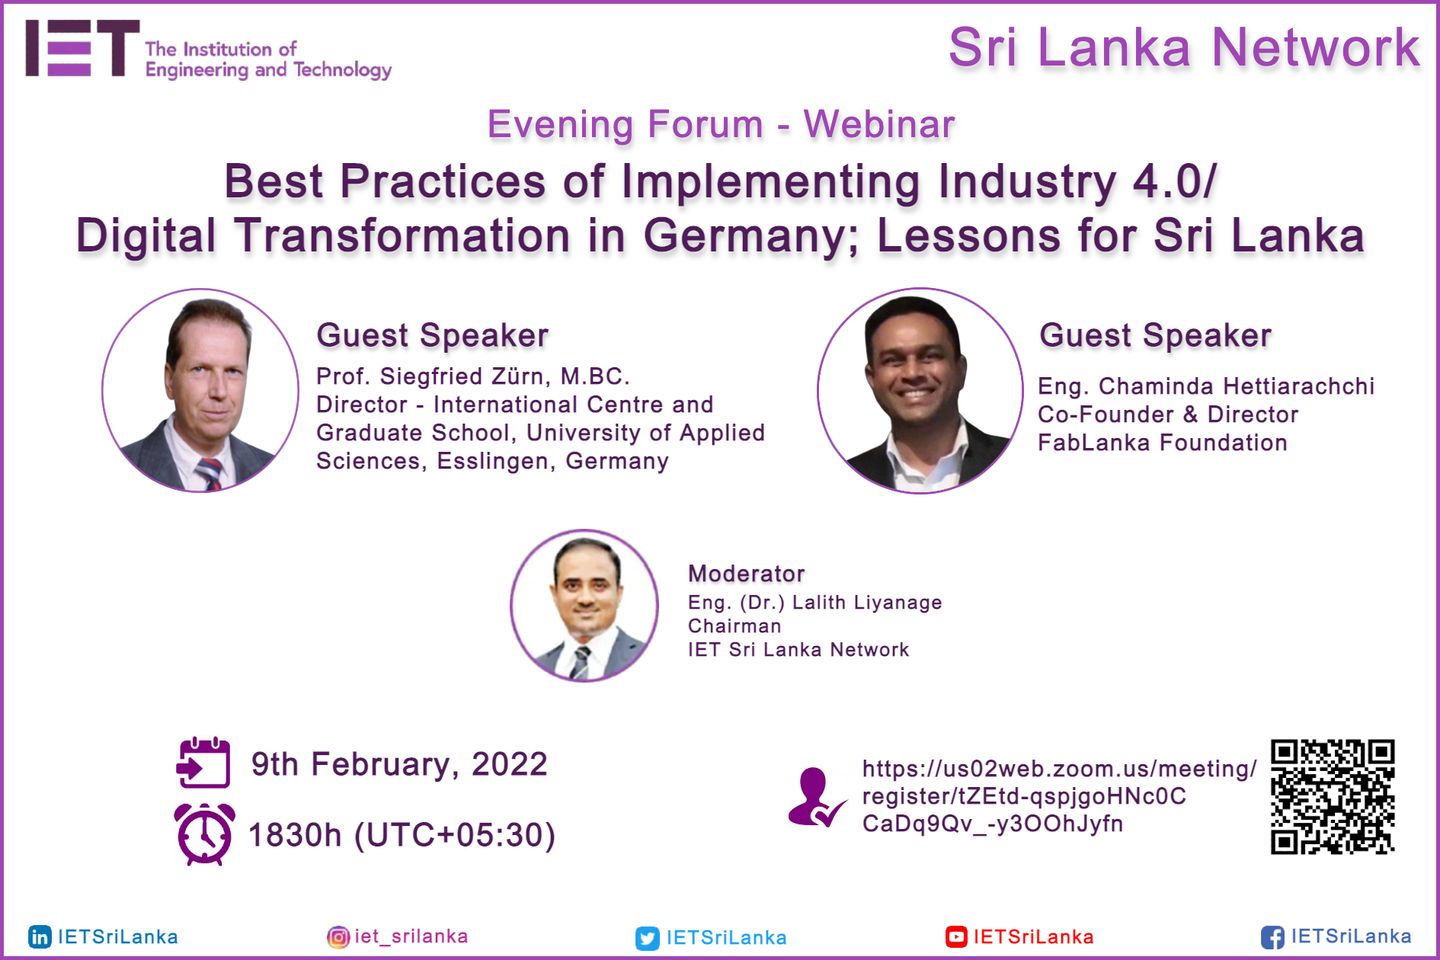 Best Practices of Implementing Industry 4.0/Digital Transformation in Germany;Lessons for Sri Lanka